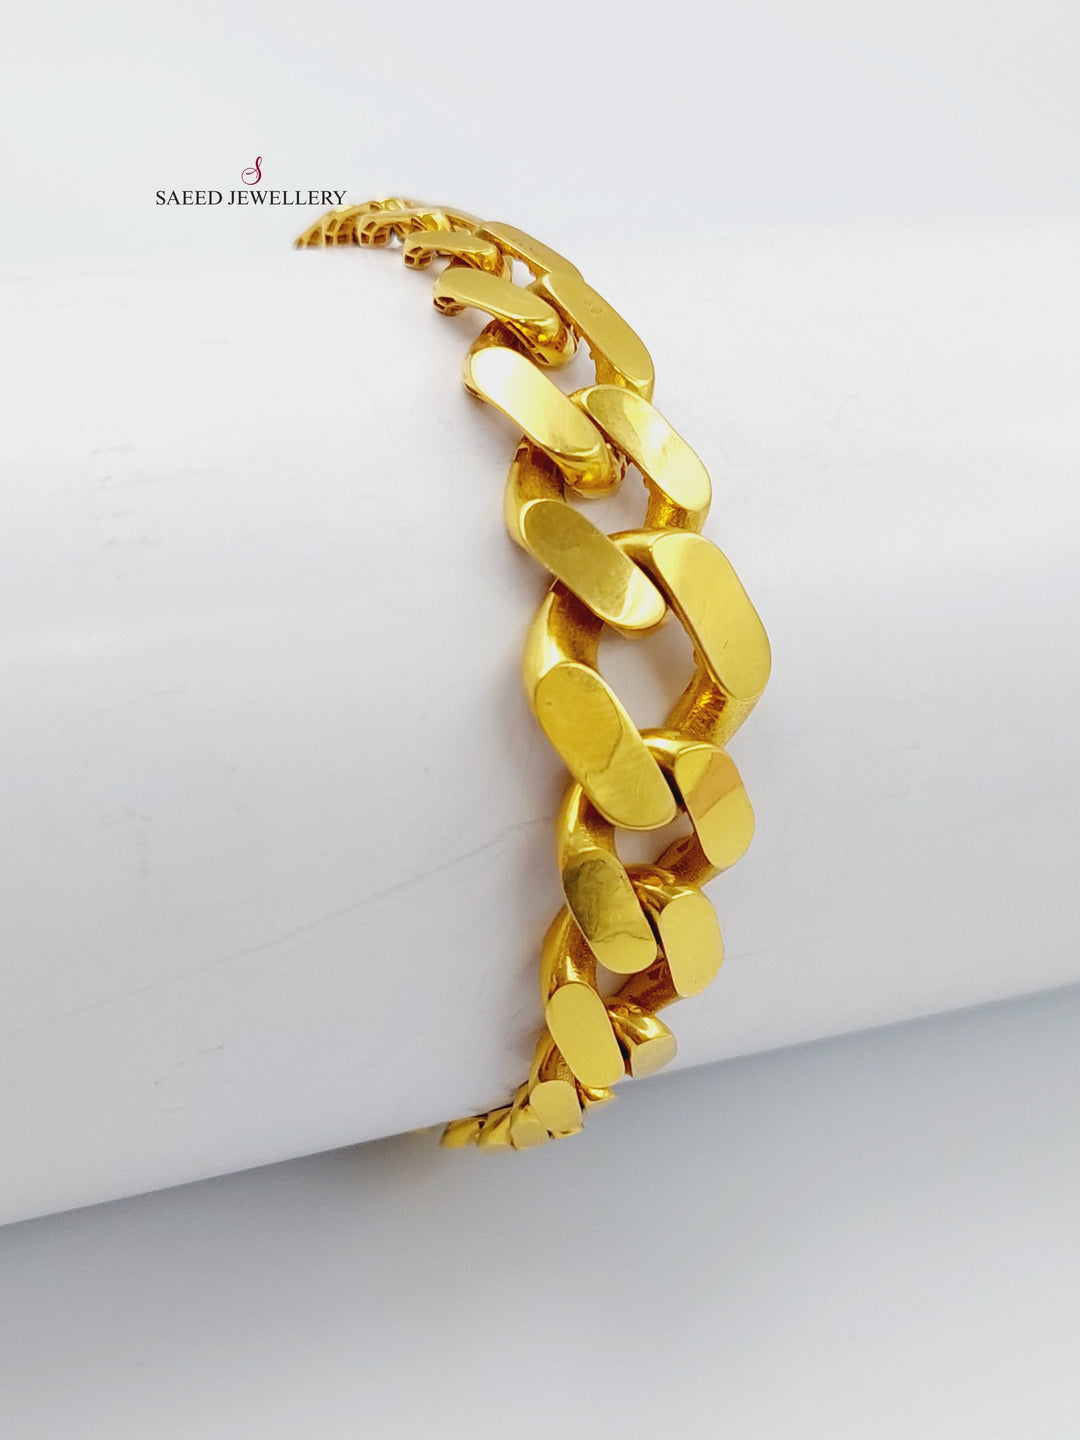 21K Gold Chain Bracelet by Saeed Jewelry - Image 1